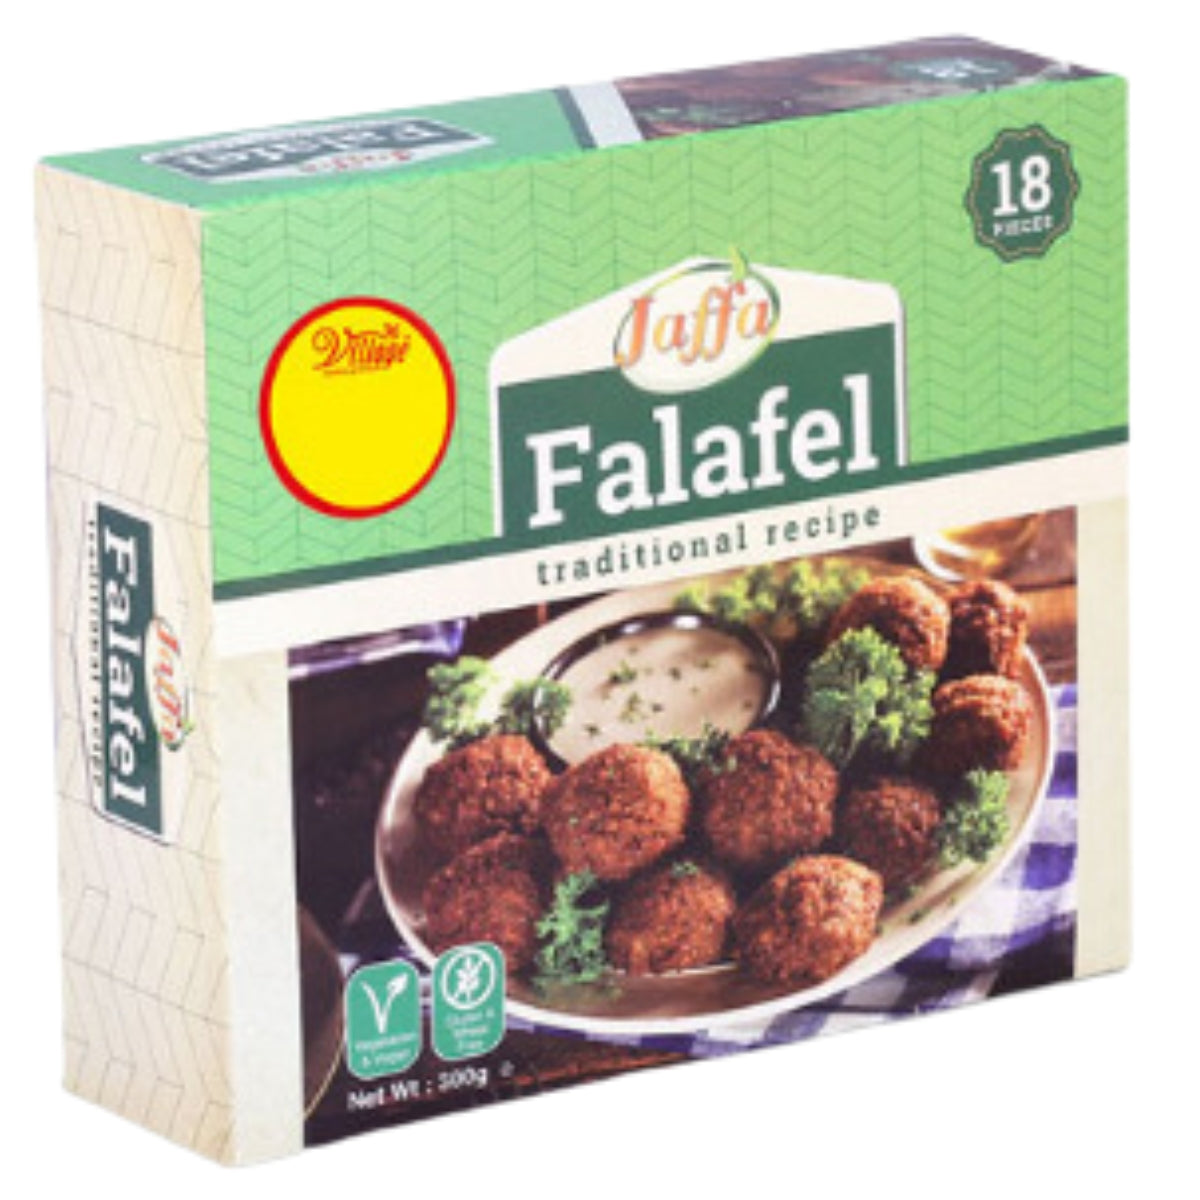 A box of Jaffa - Falafel Traditional Recipe - 250g in front of a box.